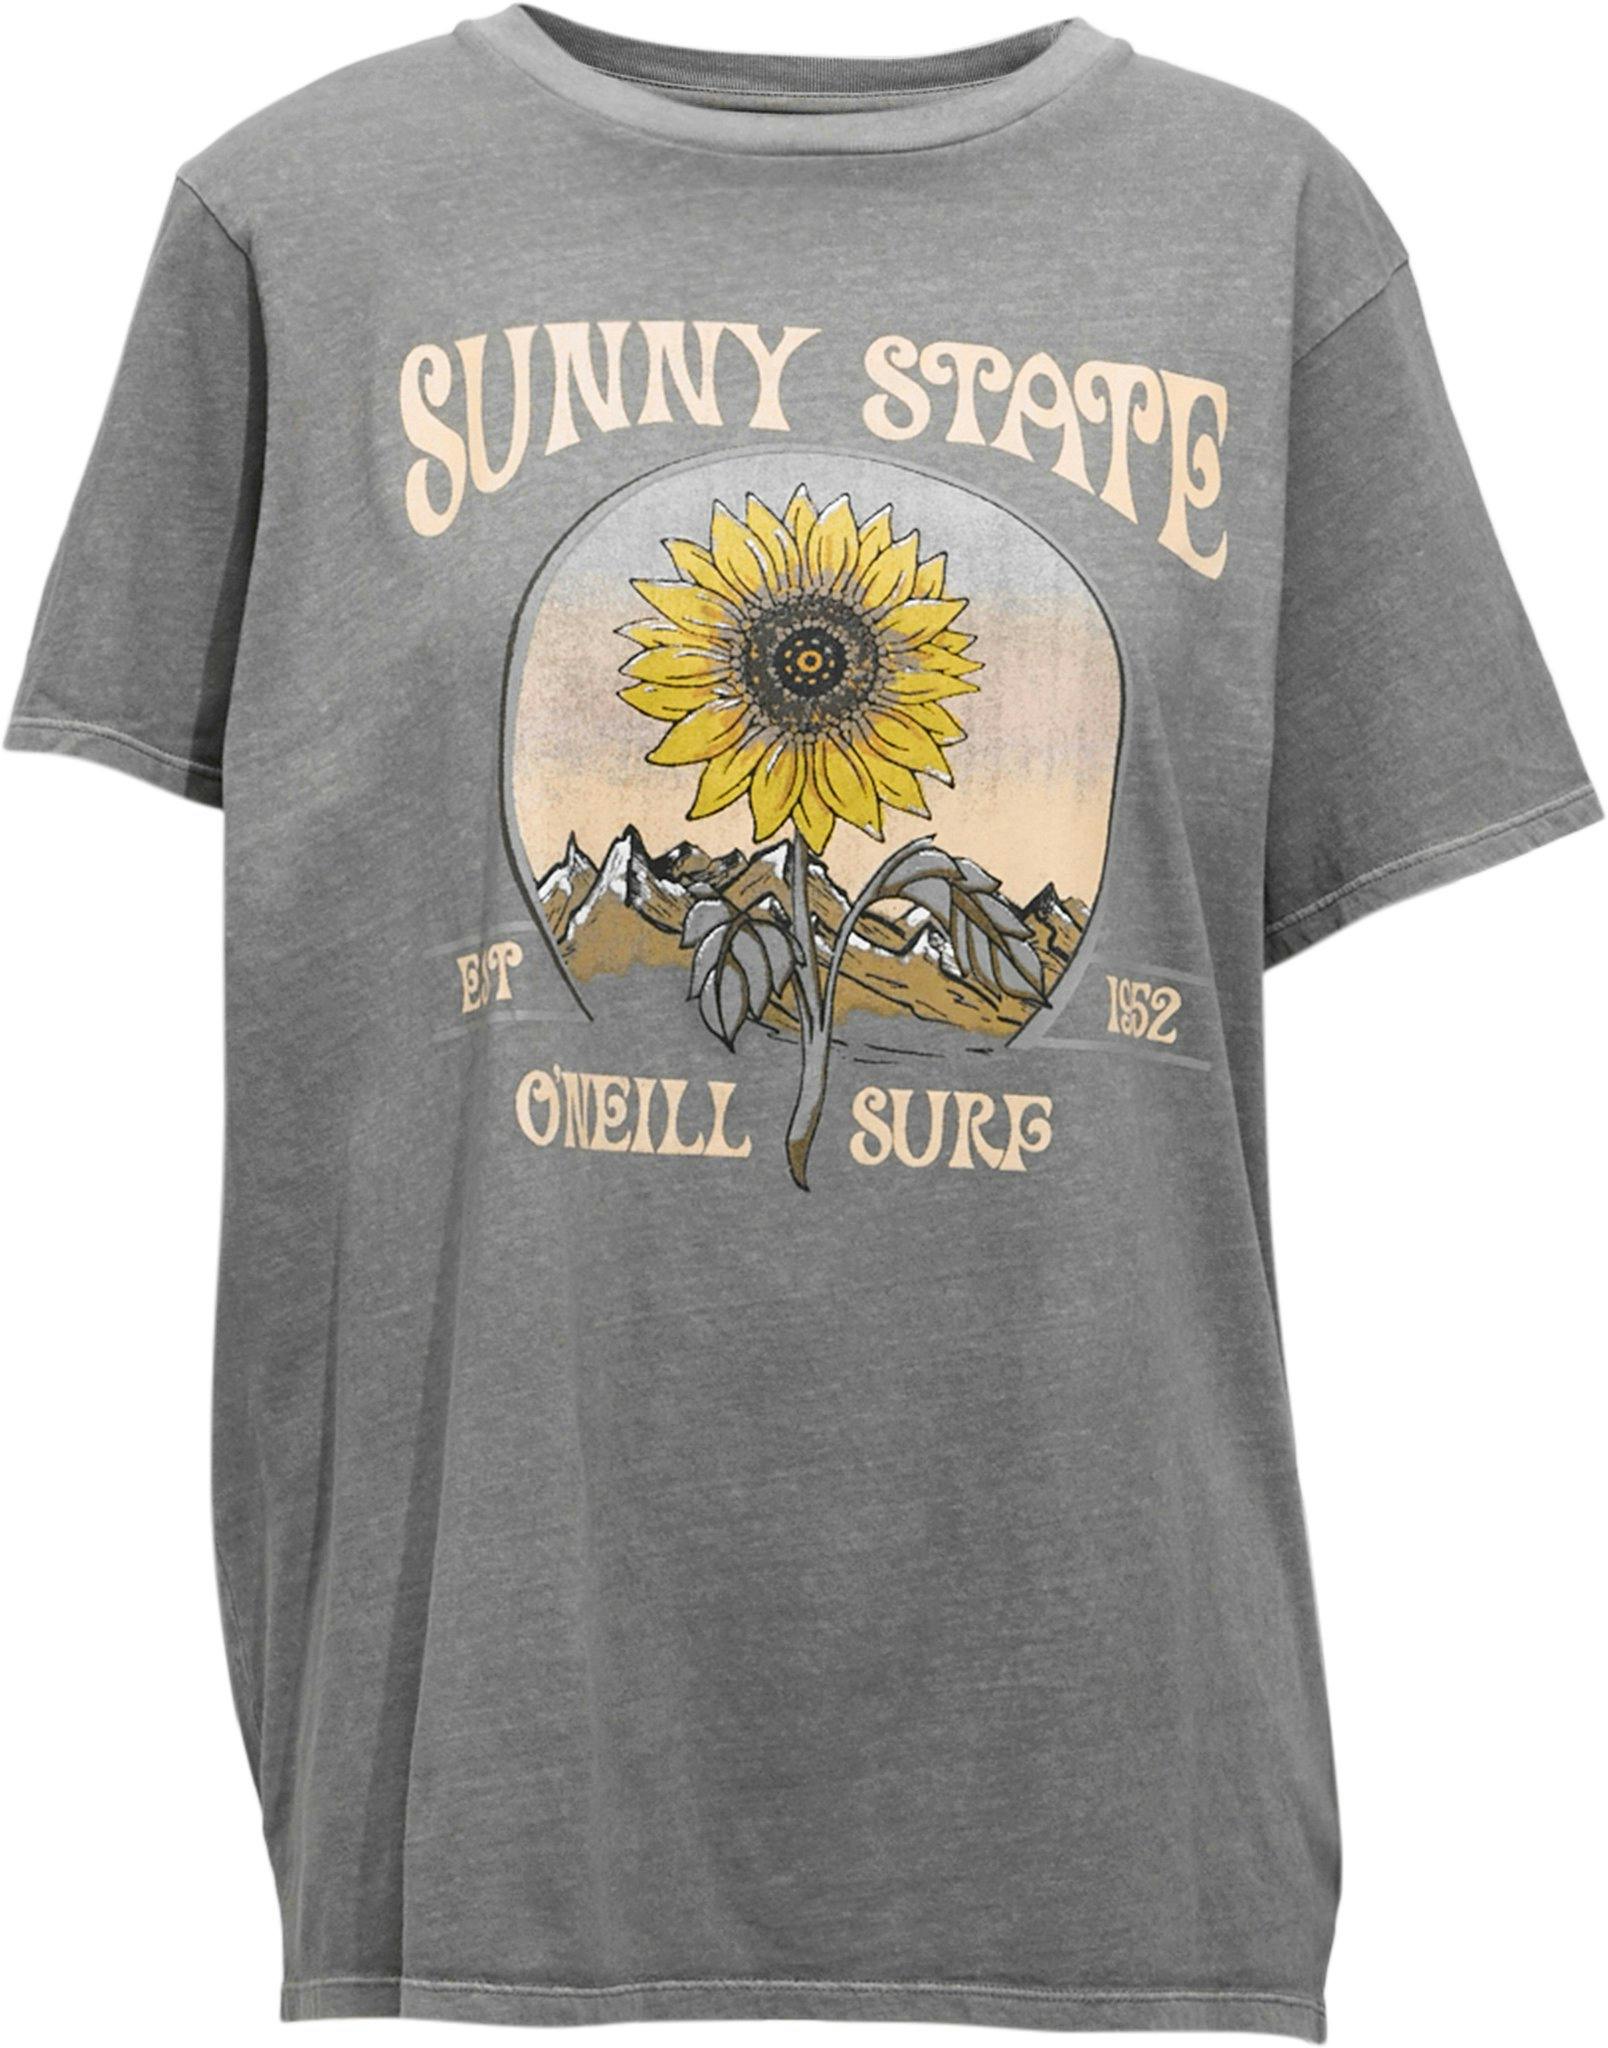 Product image for Sunny State T-Shirt - Women's